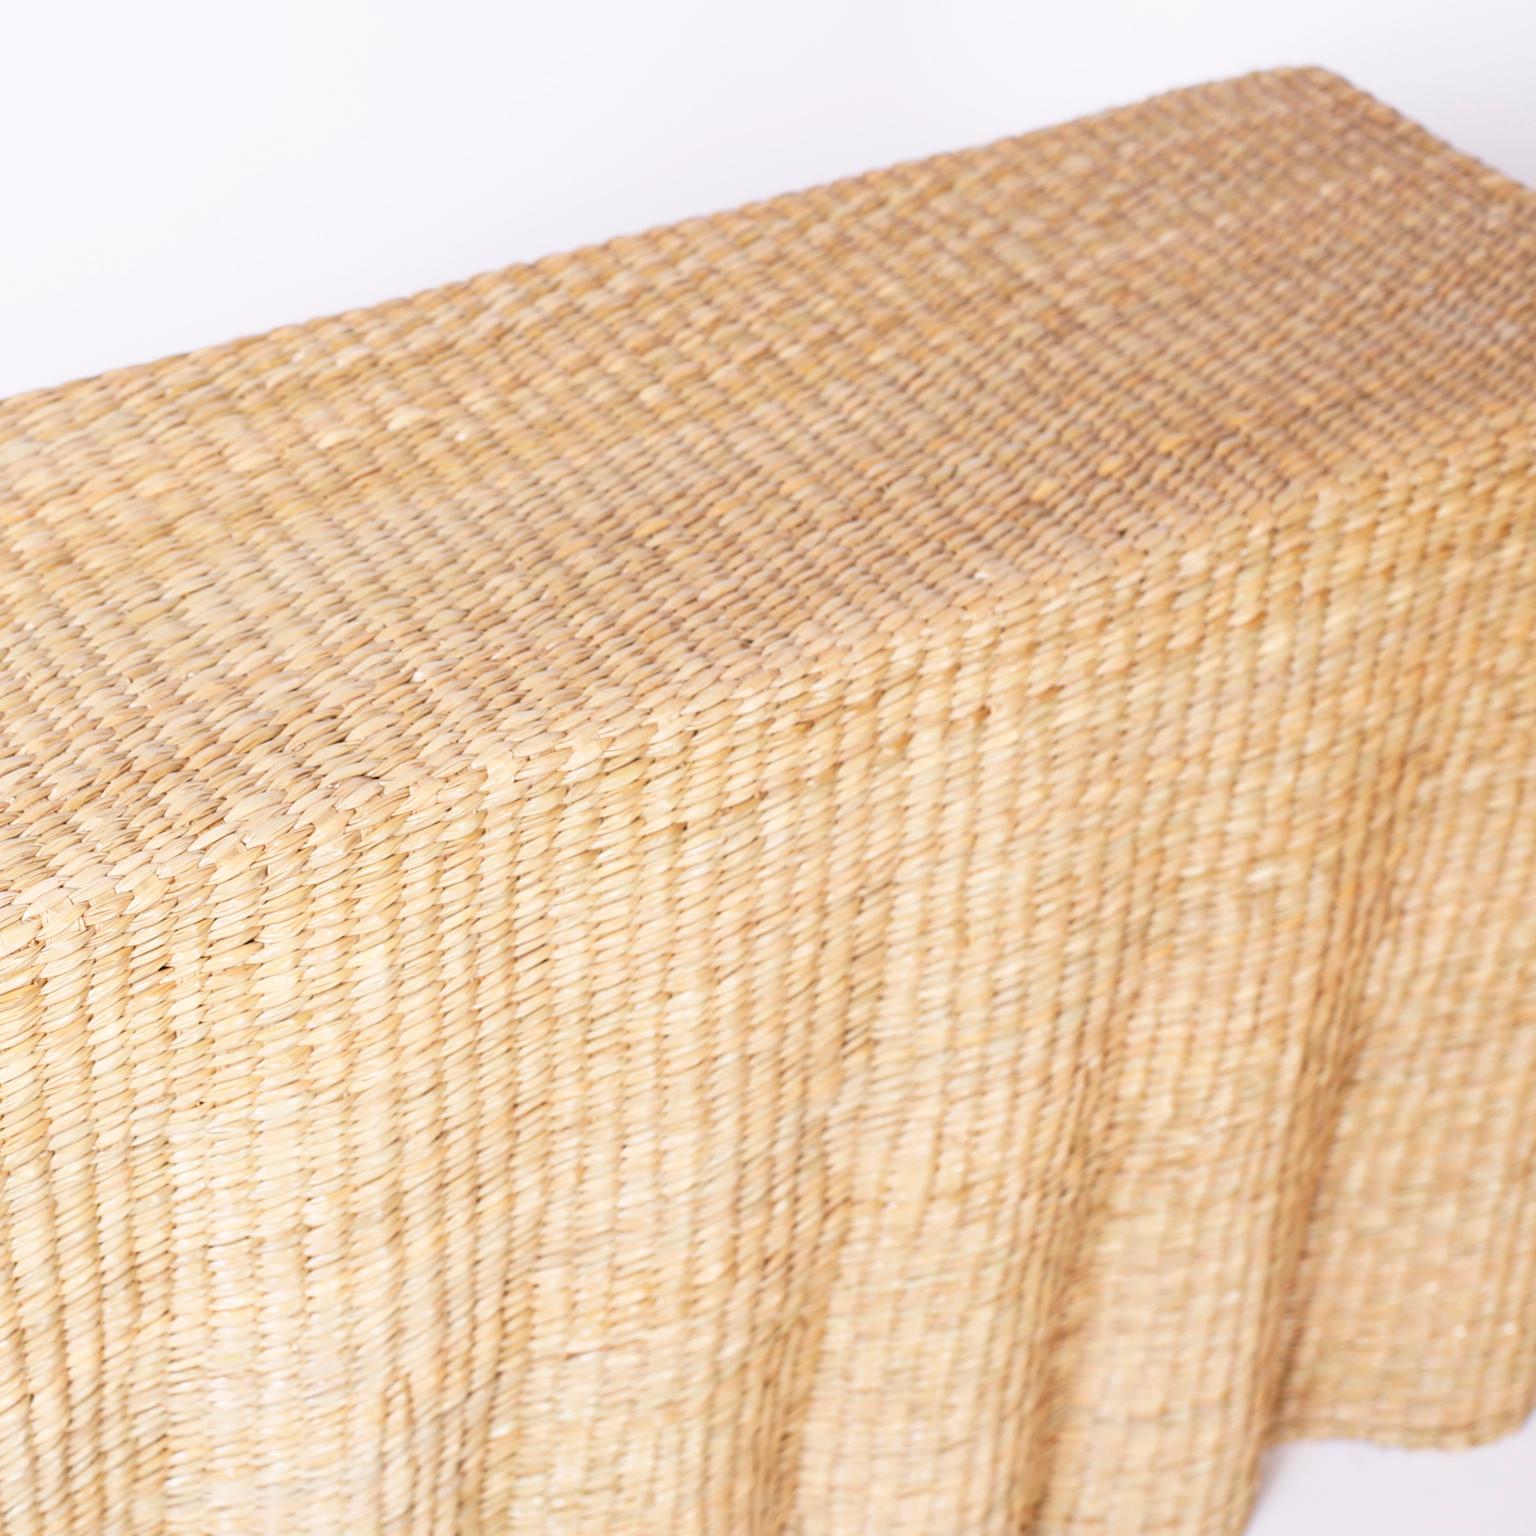 Hand-Woven Wicker Drapery Ghost Console from the FS Flores Collection